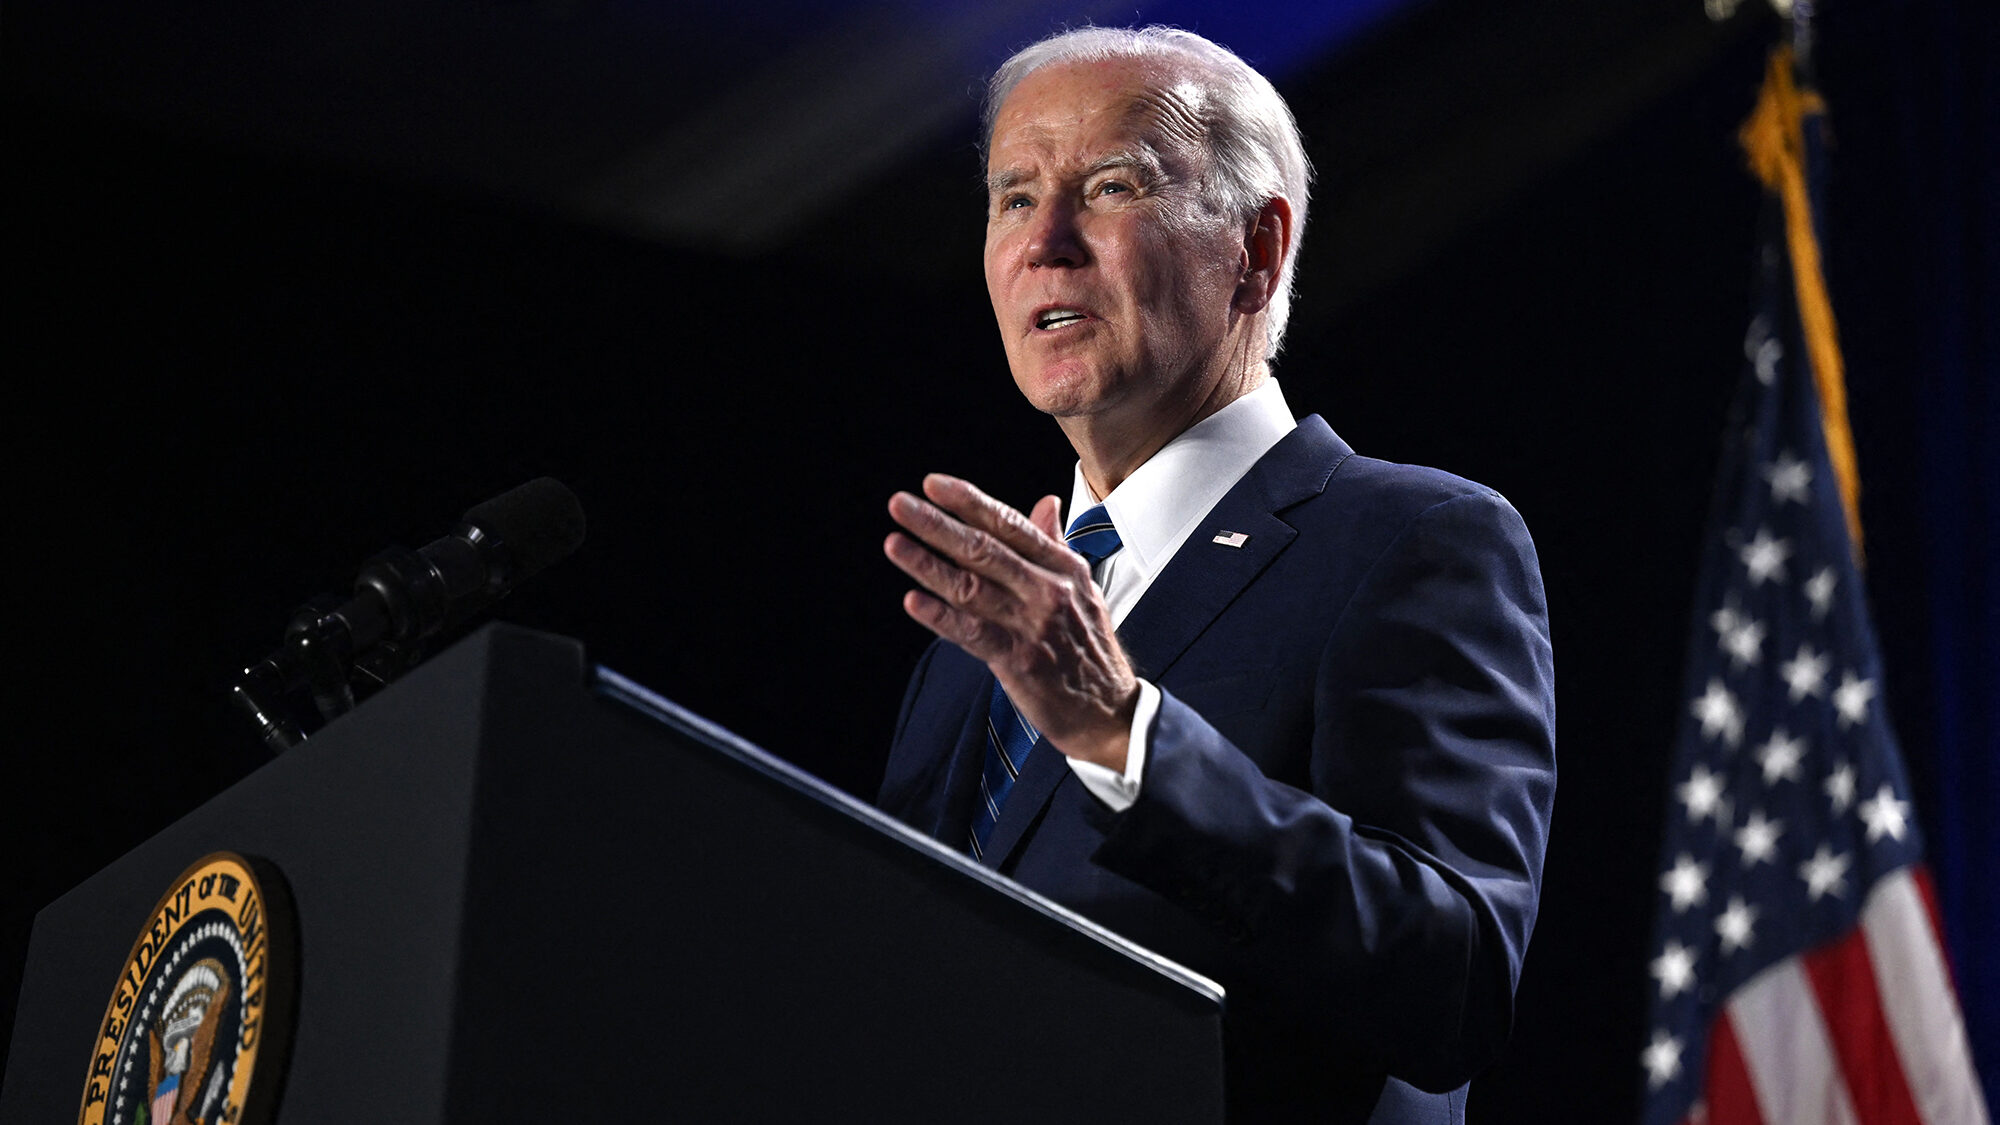 President Joe Biden, seen here in Baltimore, Maryland, on March 1, is set to call for at least $2 t...